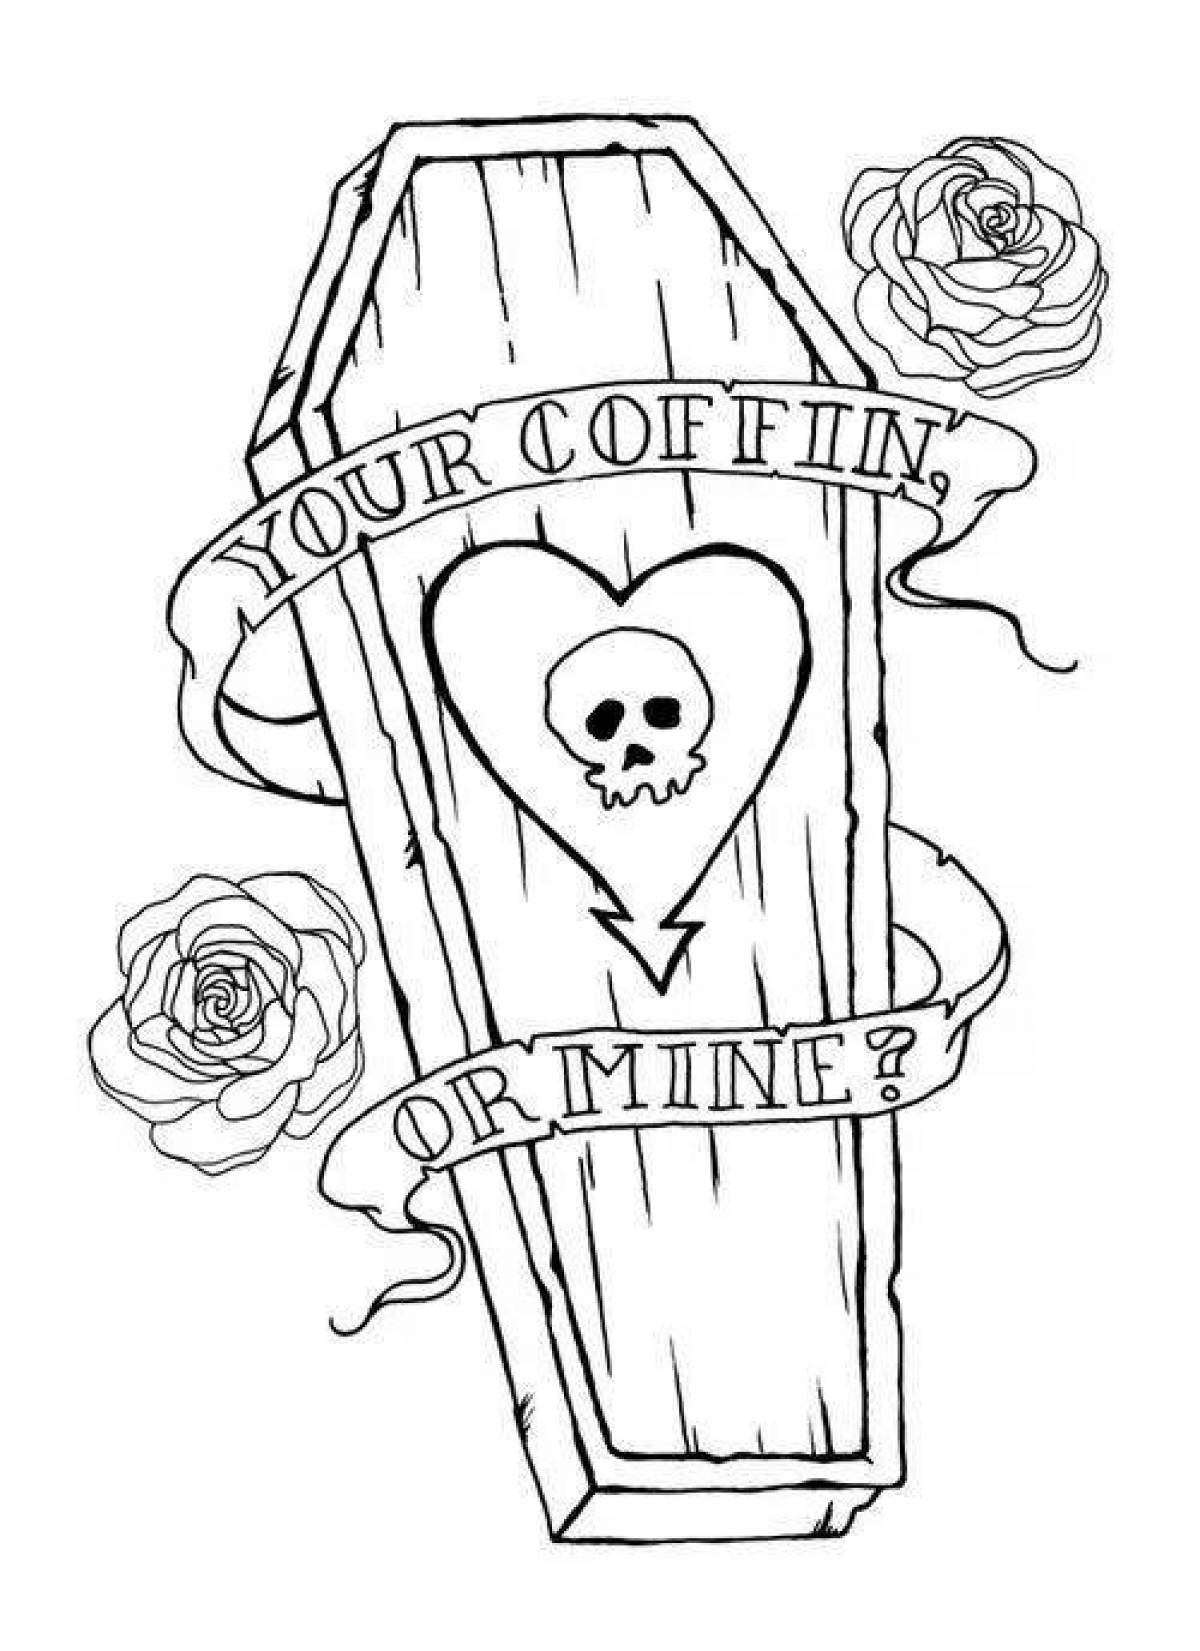 Coloring book gorgeous coffin